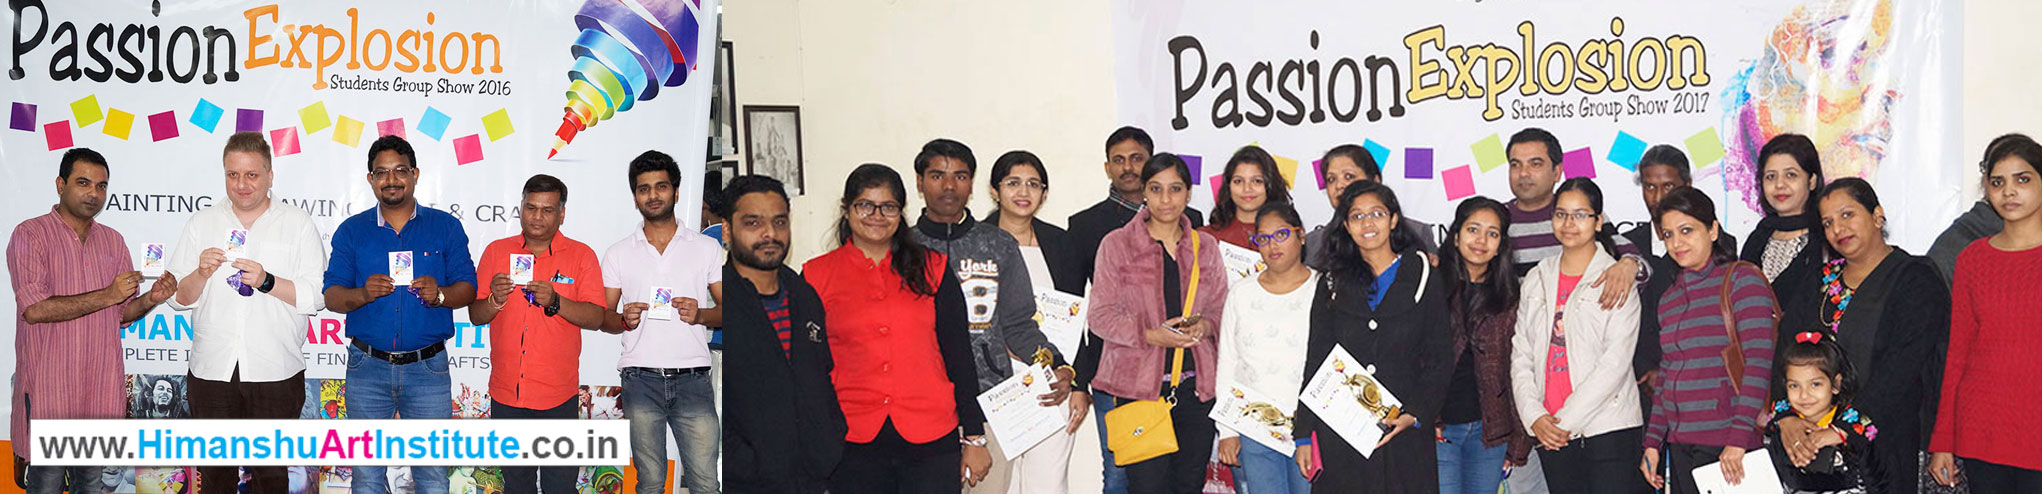 Passion Explosion - National Level Group Art Exhibition